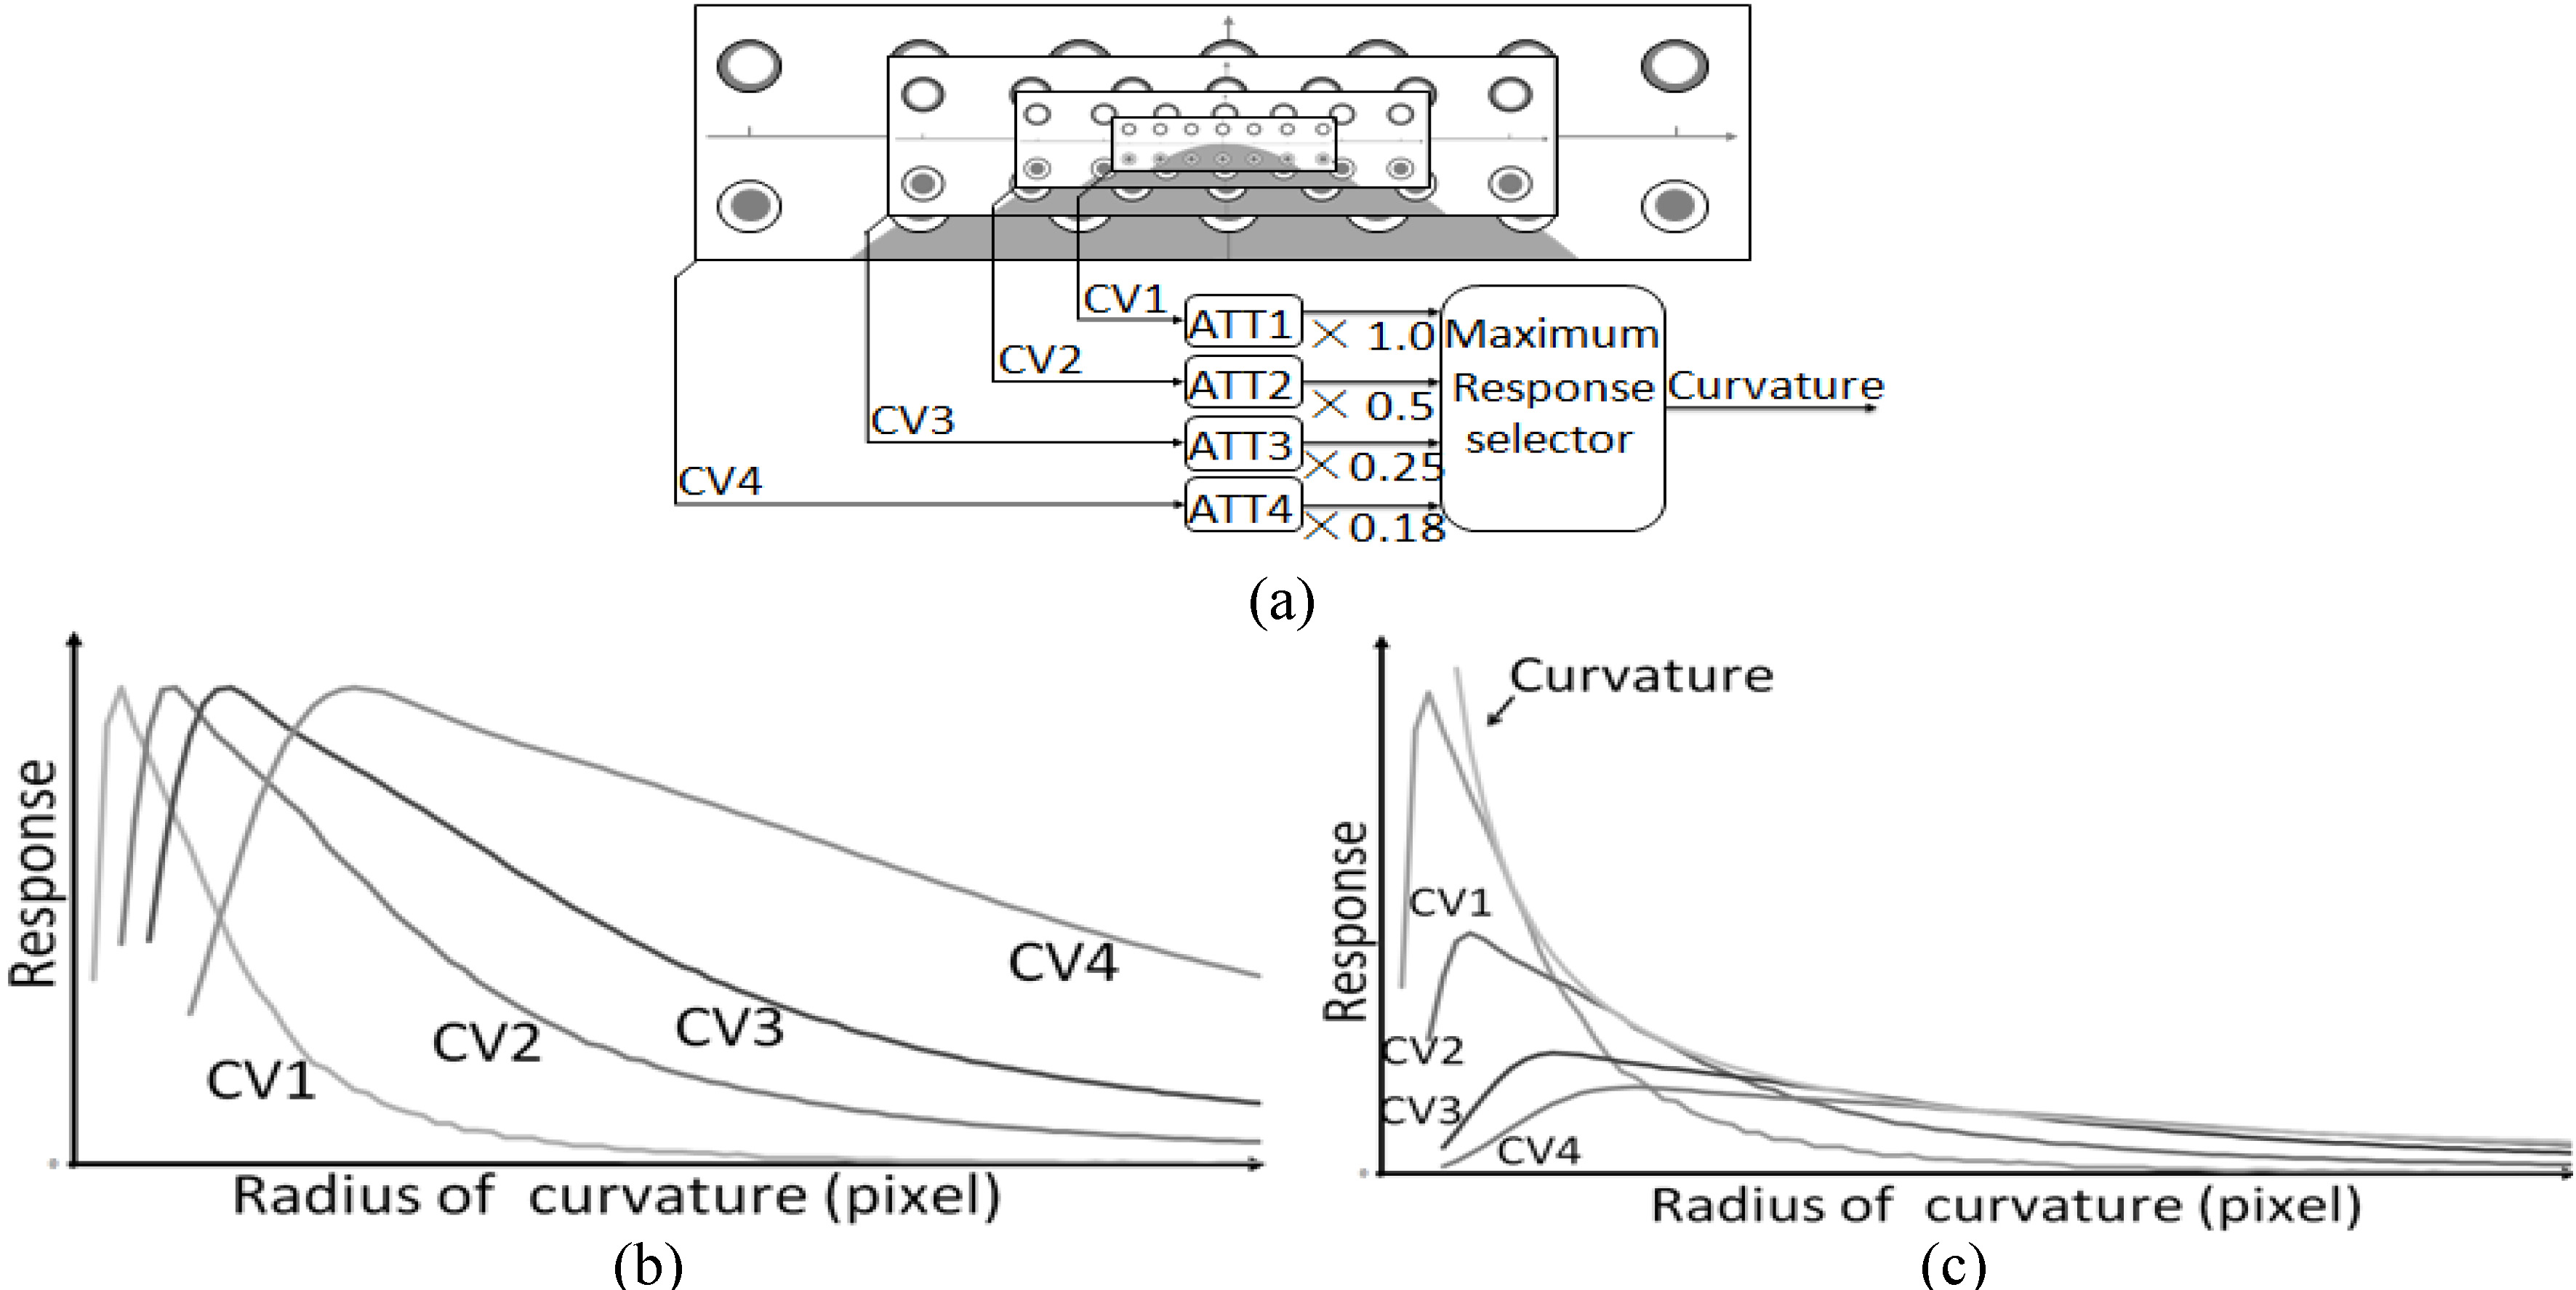 Detection of broad range of curvatures. (a) Schematic diagram for curvature detection. (b) Normalized response curves of CV1, CV2, CV3 and CV4. (c) Attenuated response curves. The deep black curve shows the selector’s outputs.